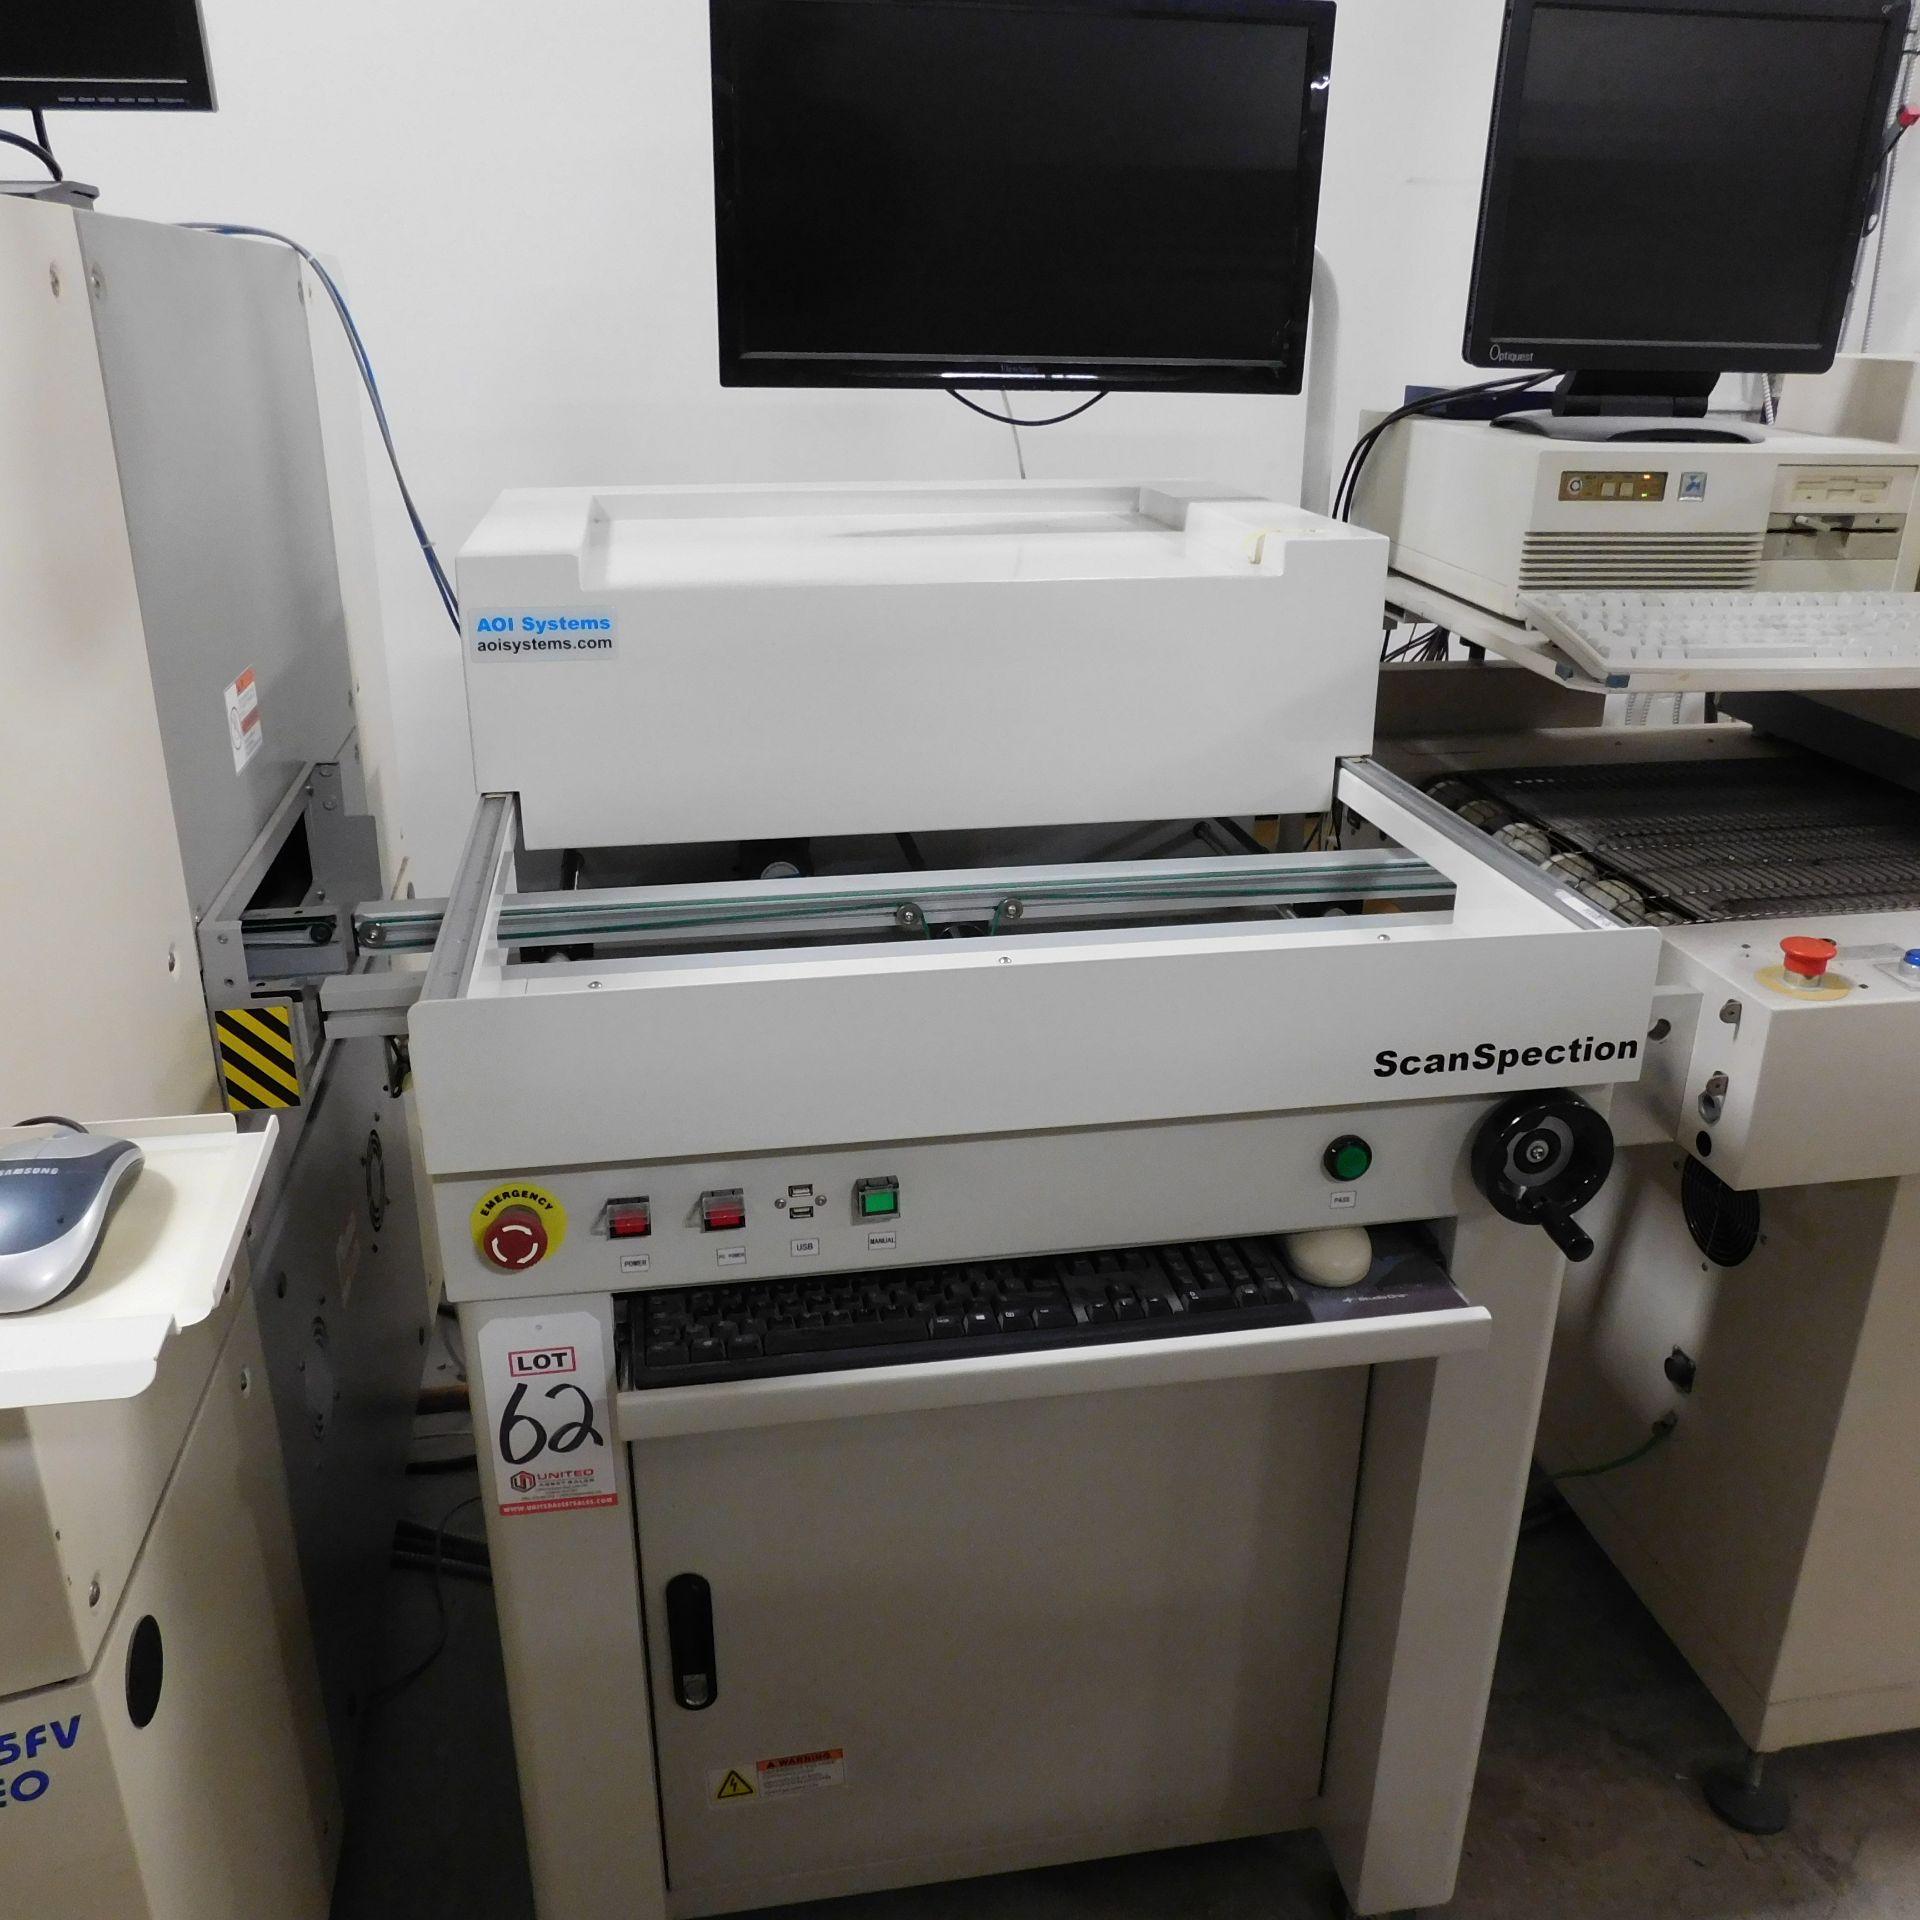 2014 AOI SYSTEMS SCANSPECTION SYSTEM SS15000IL, MODIFIED EPSON GT20000 A3 SCANNER (600 DPI OPTICAL) - Image 2 of 5